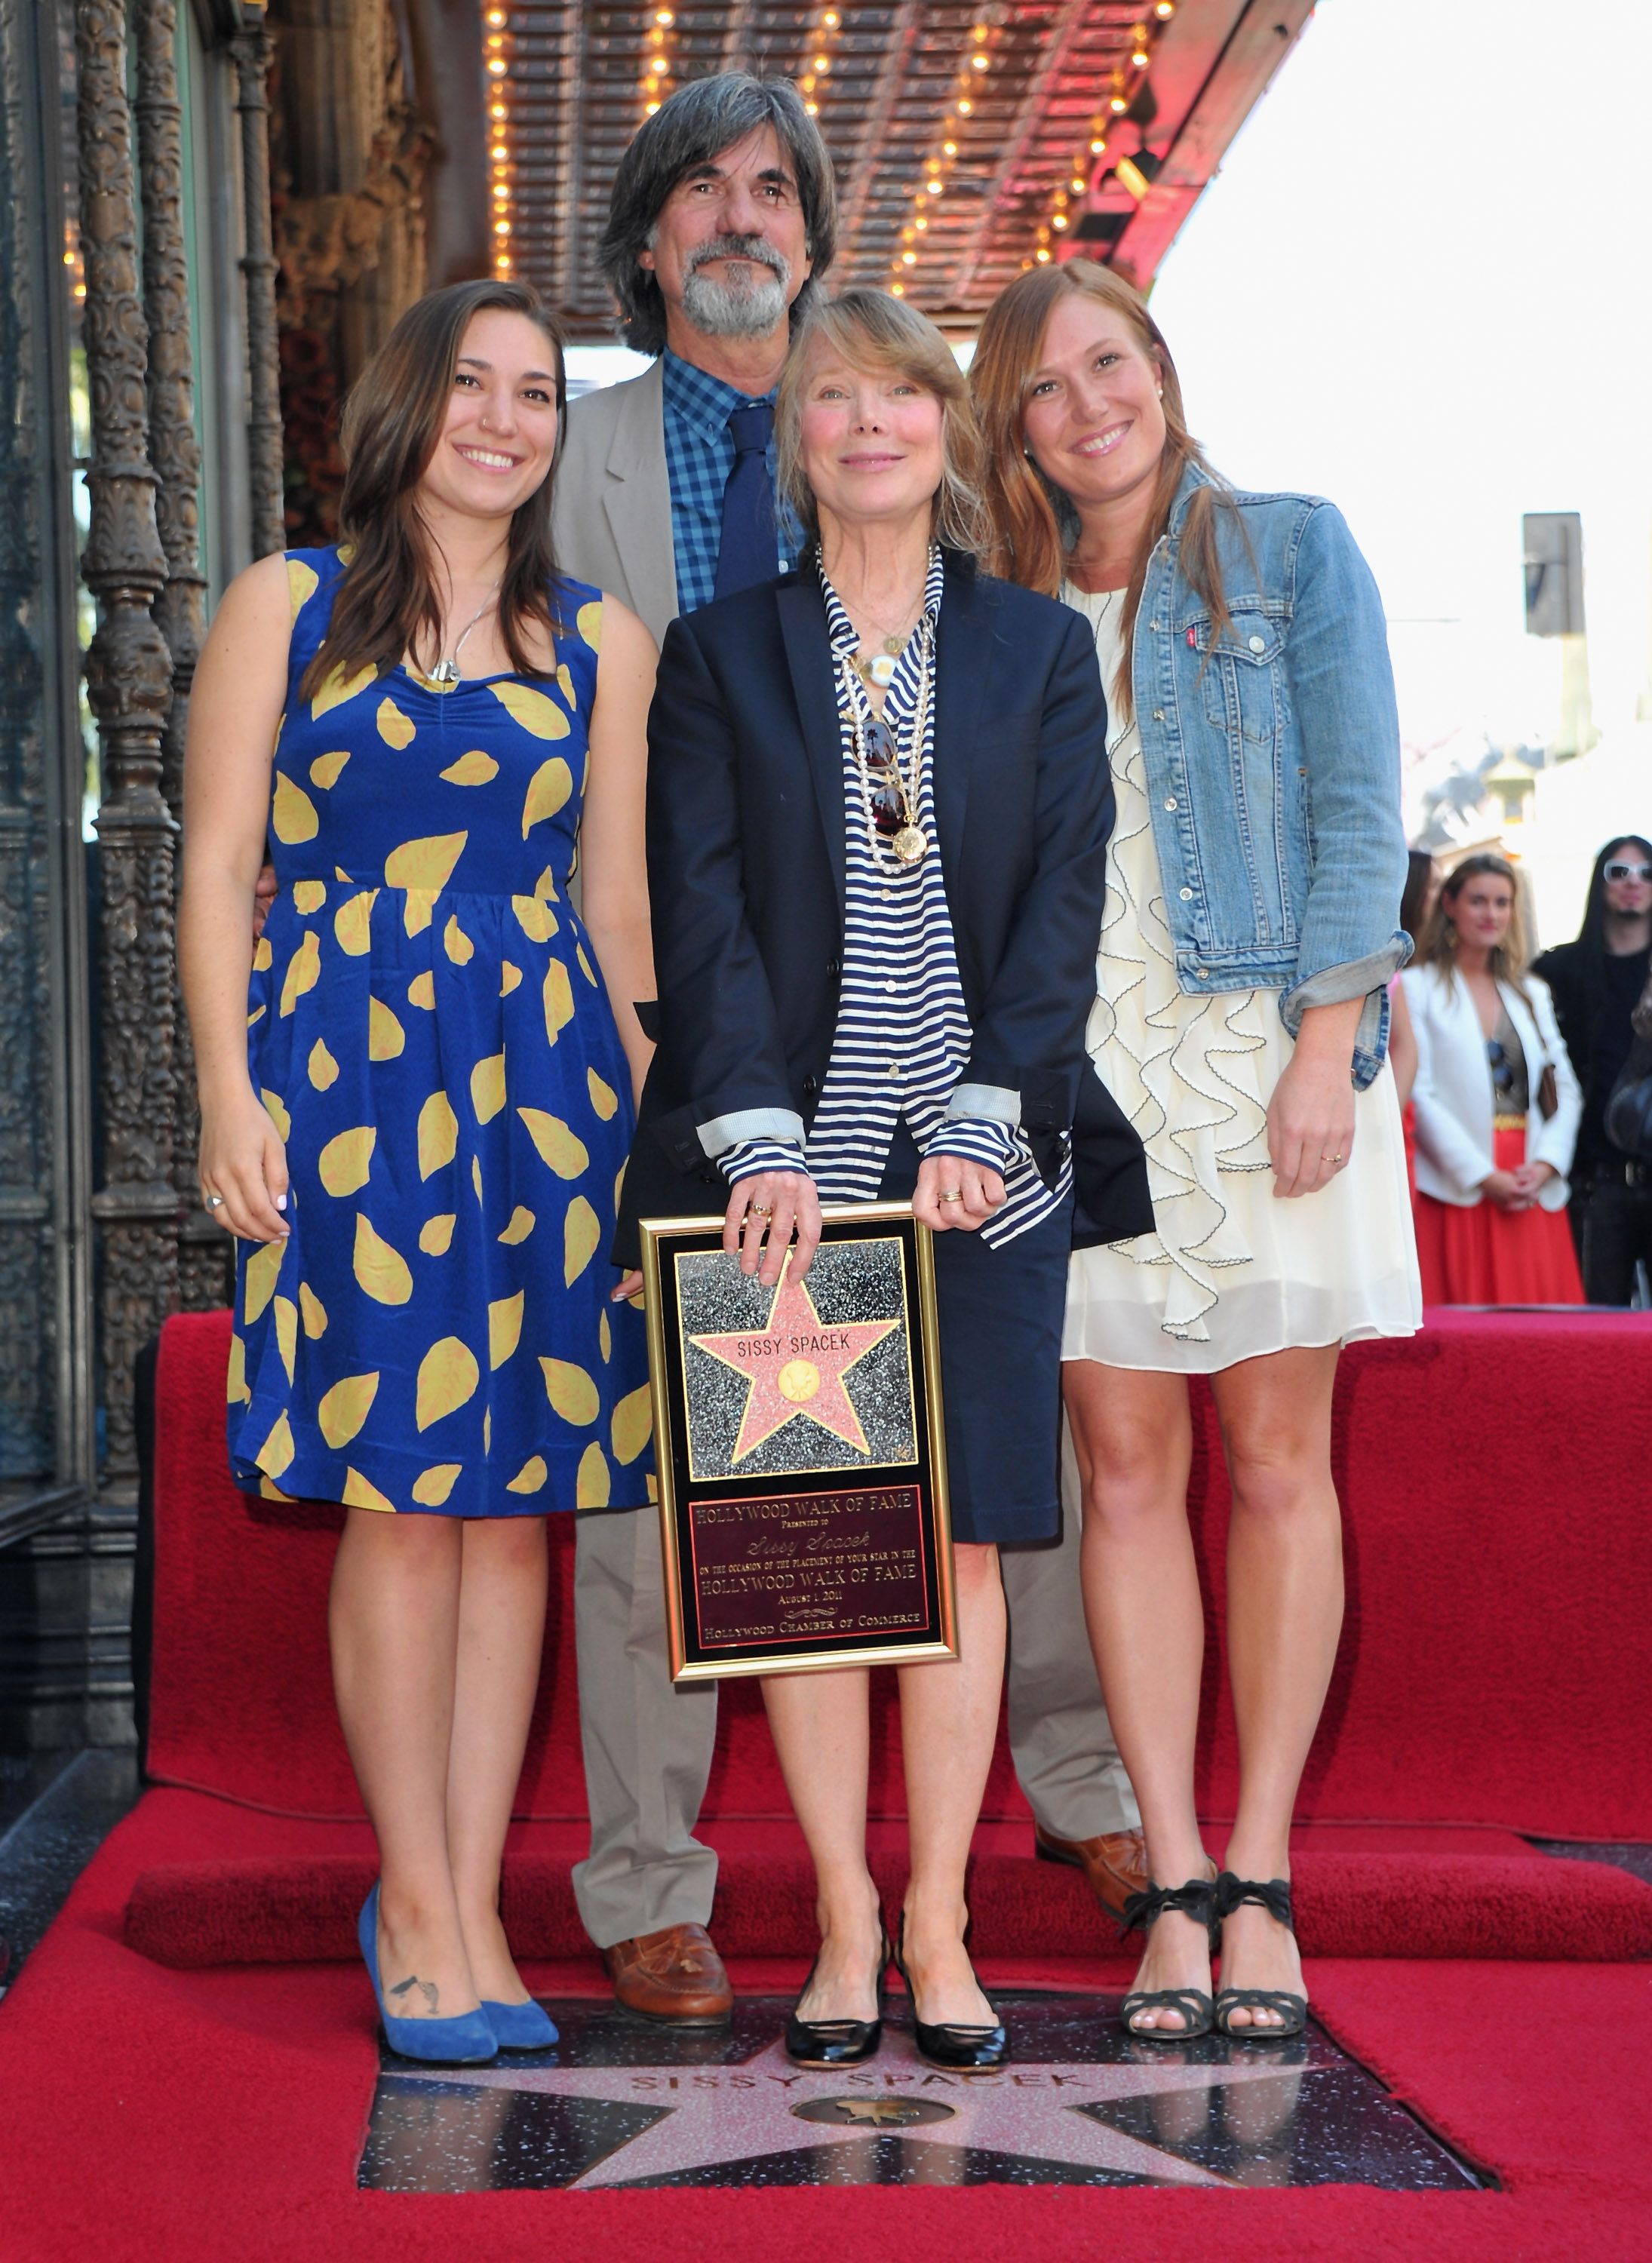 Madison Fisk, Jack Fisk, Sissy Spacek, and Schuyler Fisk attend the ceremony Honoring Sissy Spacek on the Hollywood Walk of Fame in front of the El Capitan Theatre on August 1, 2011 in Hollywood, California. | Source: Getty Images